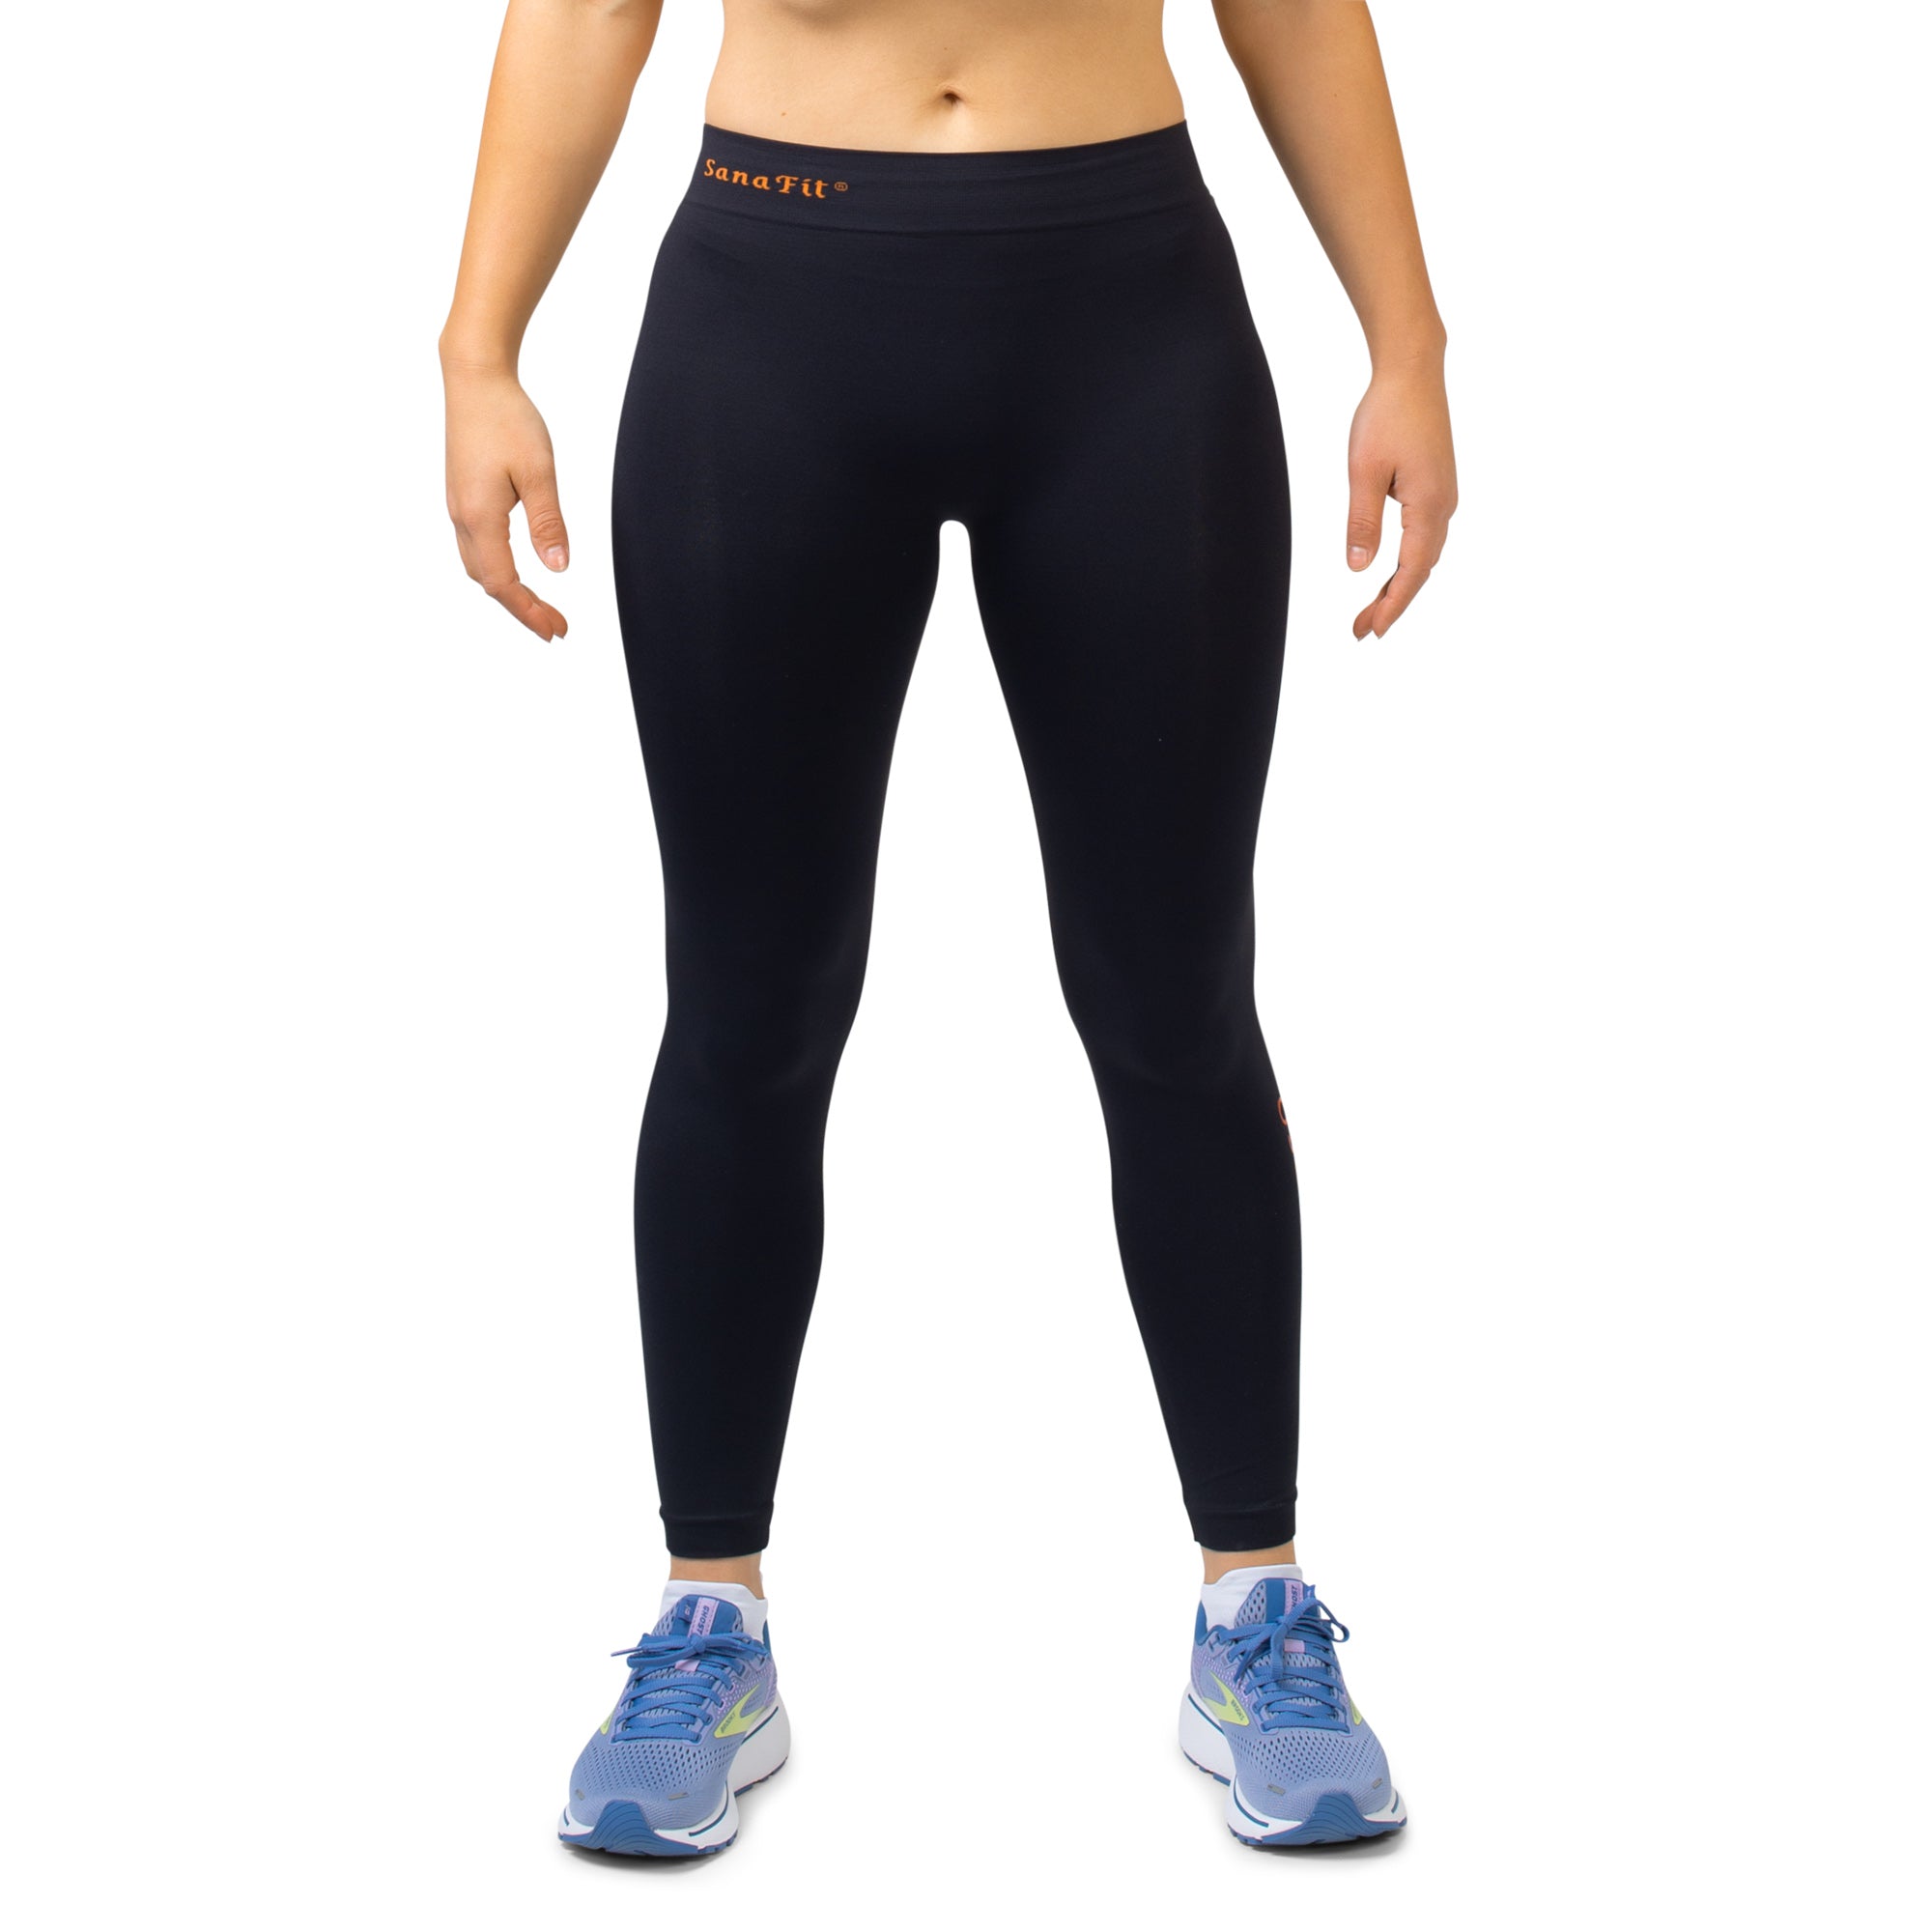 Womens Gym Leggings Sale Uk  International Society of Precision Agriculture